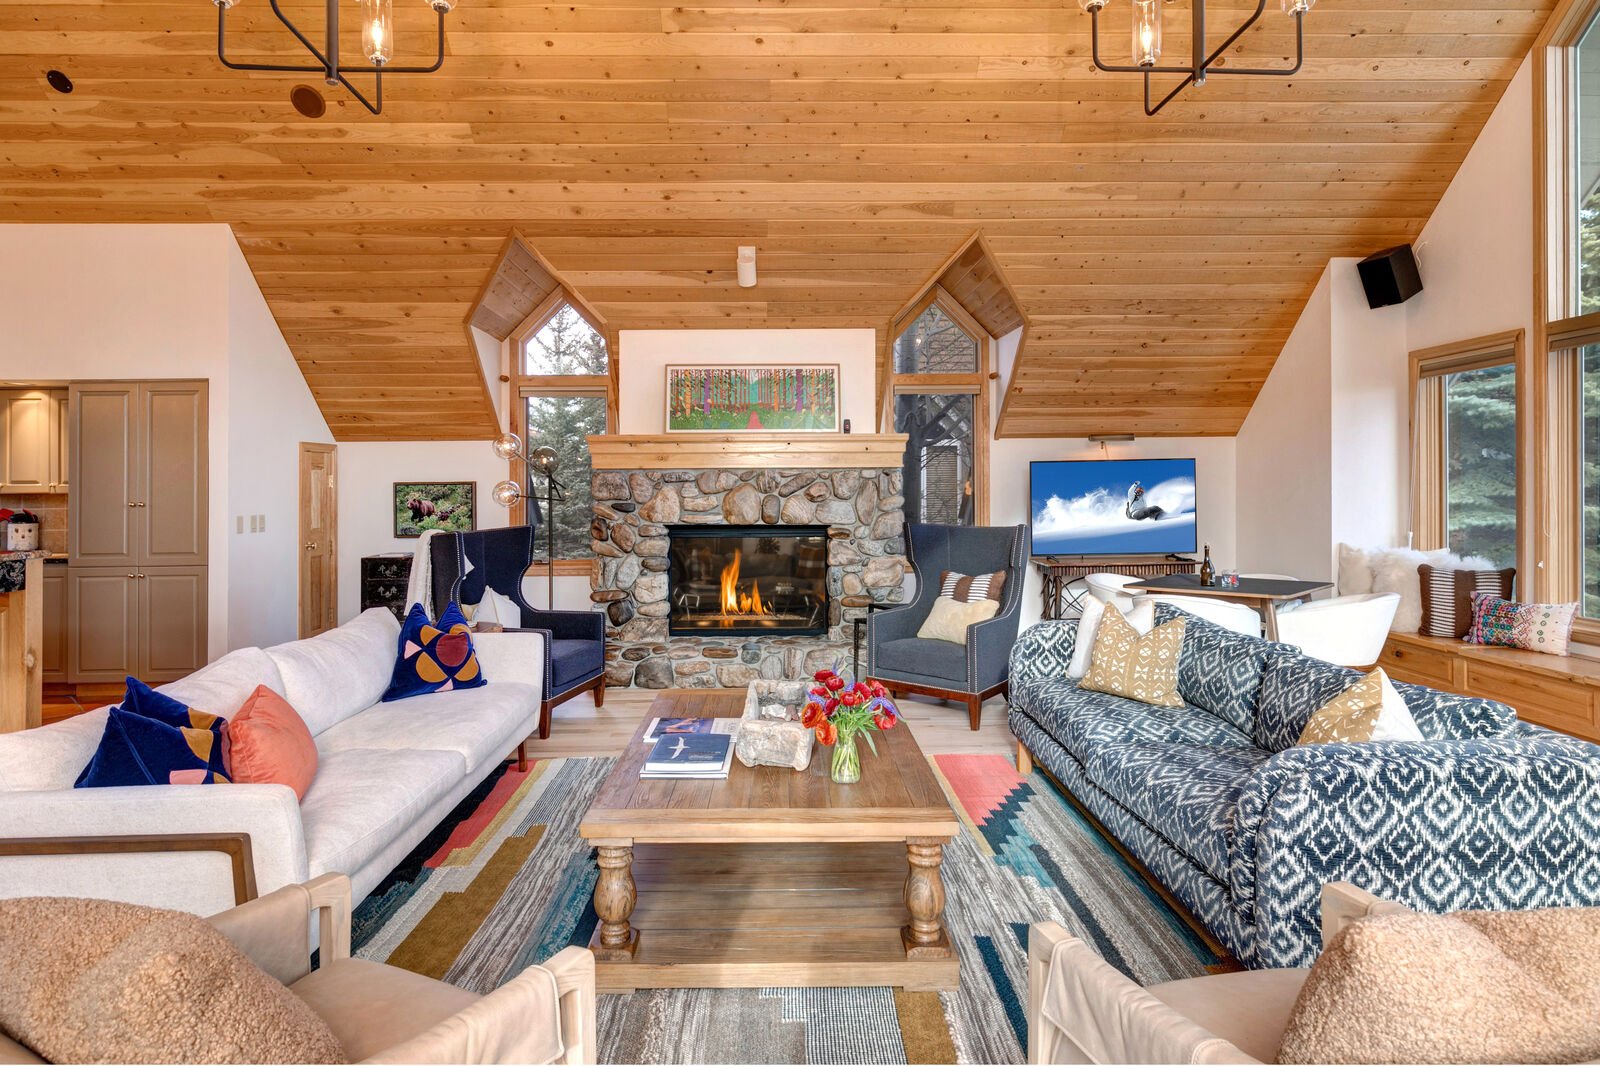 The inside of our house rentals in jackson hole wyoming